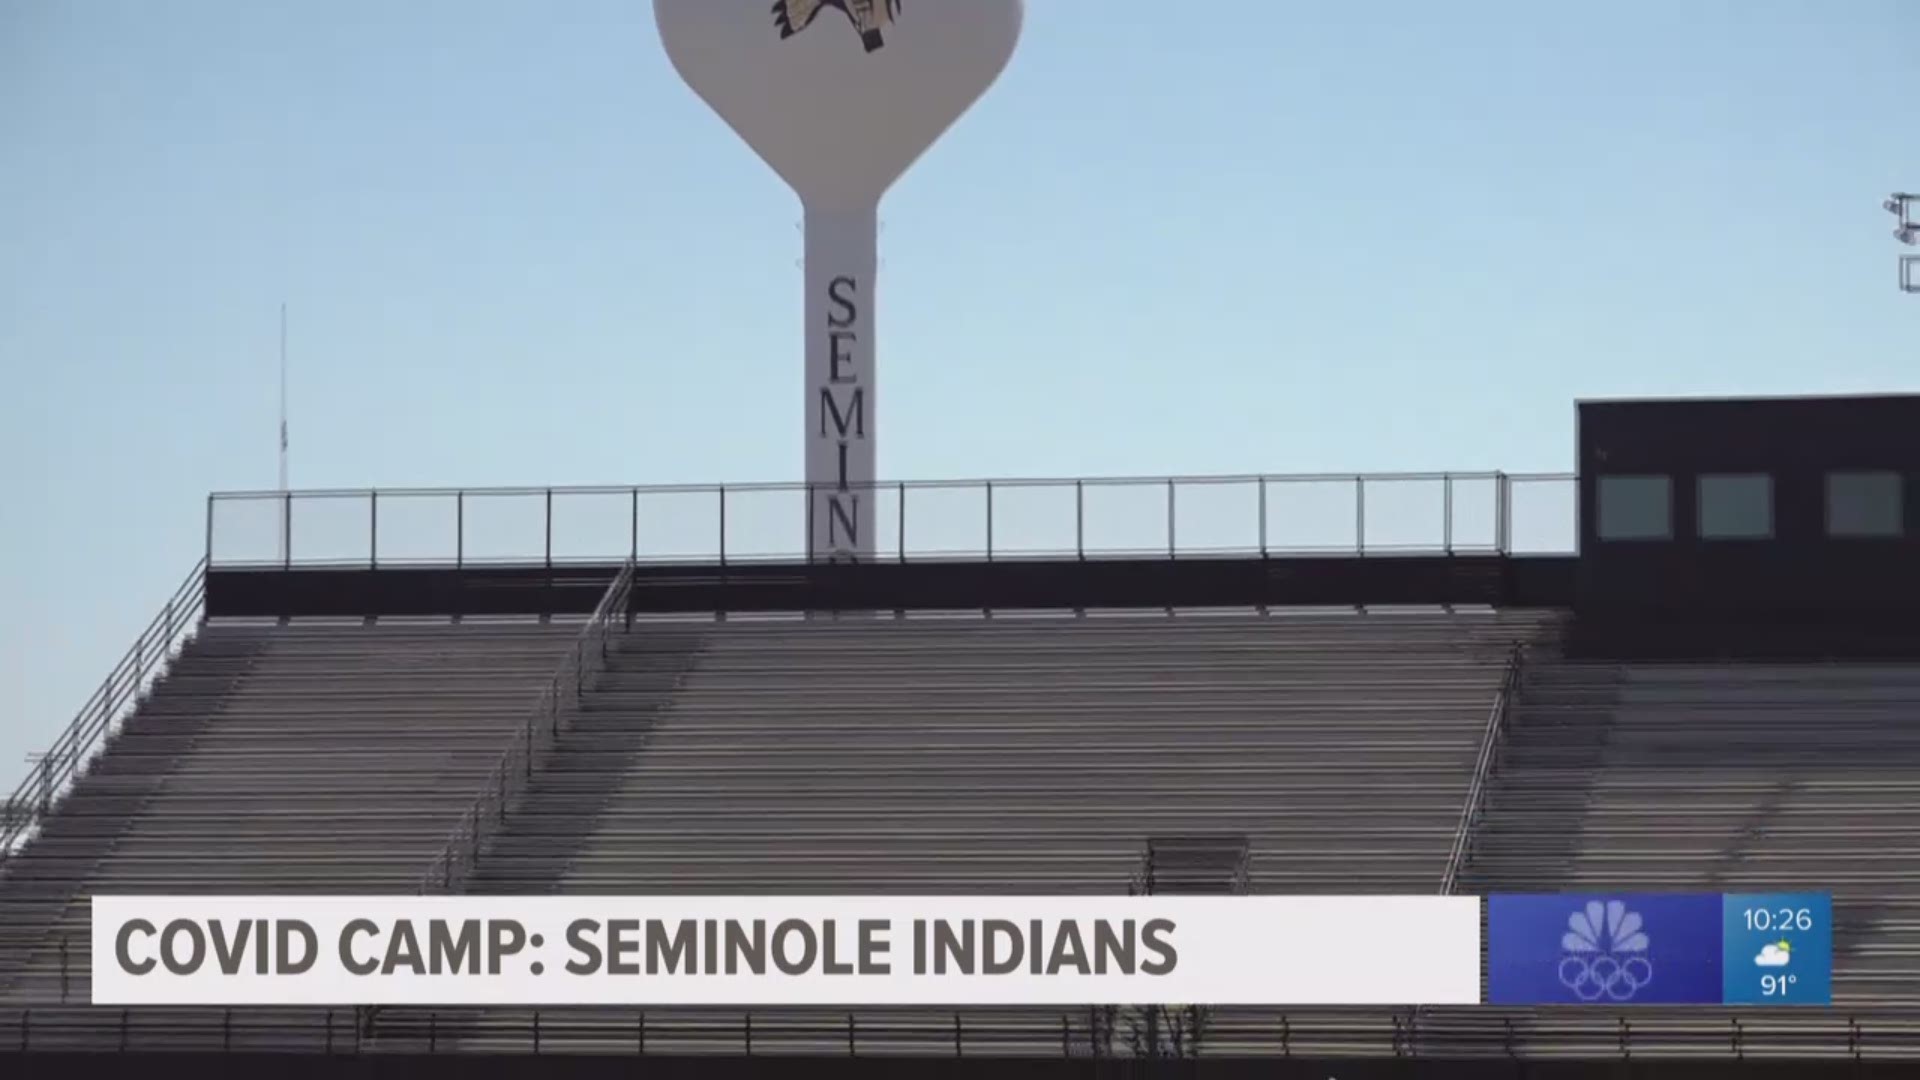 After Ty Palmer's first year as head coach for Seminole, the Indians are looking to make a statement in the post season with the help of their new offense.